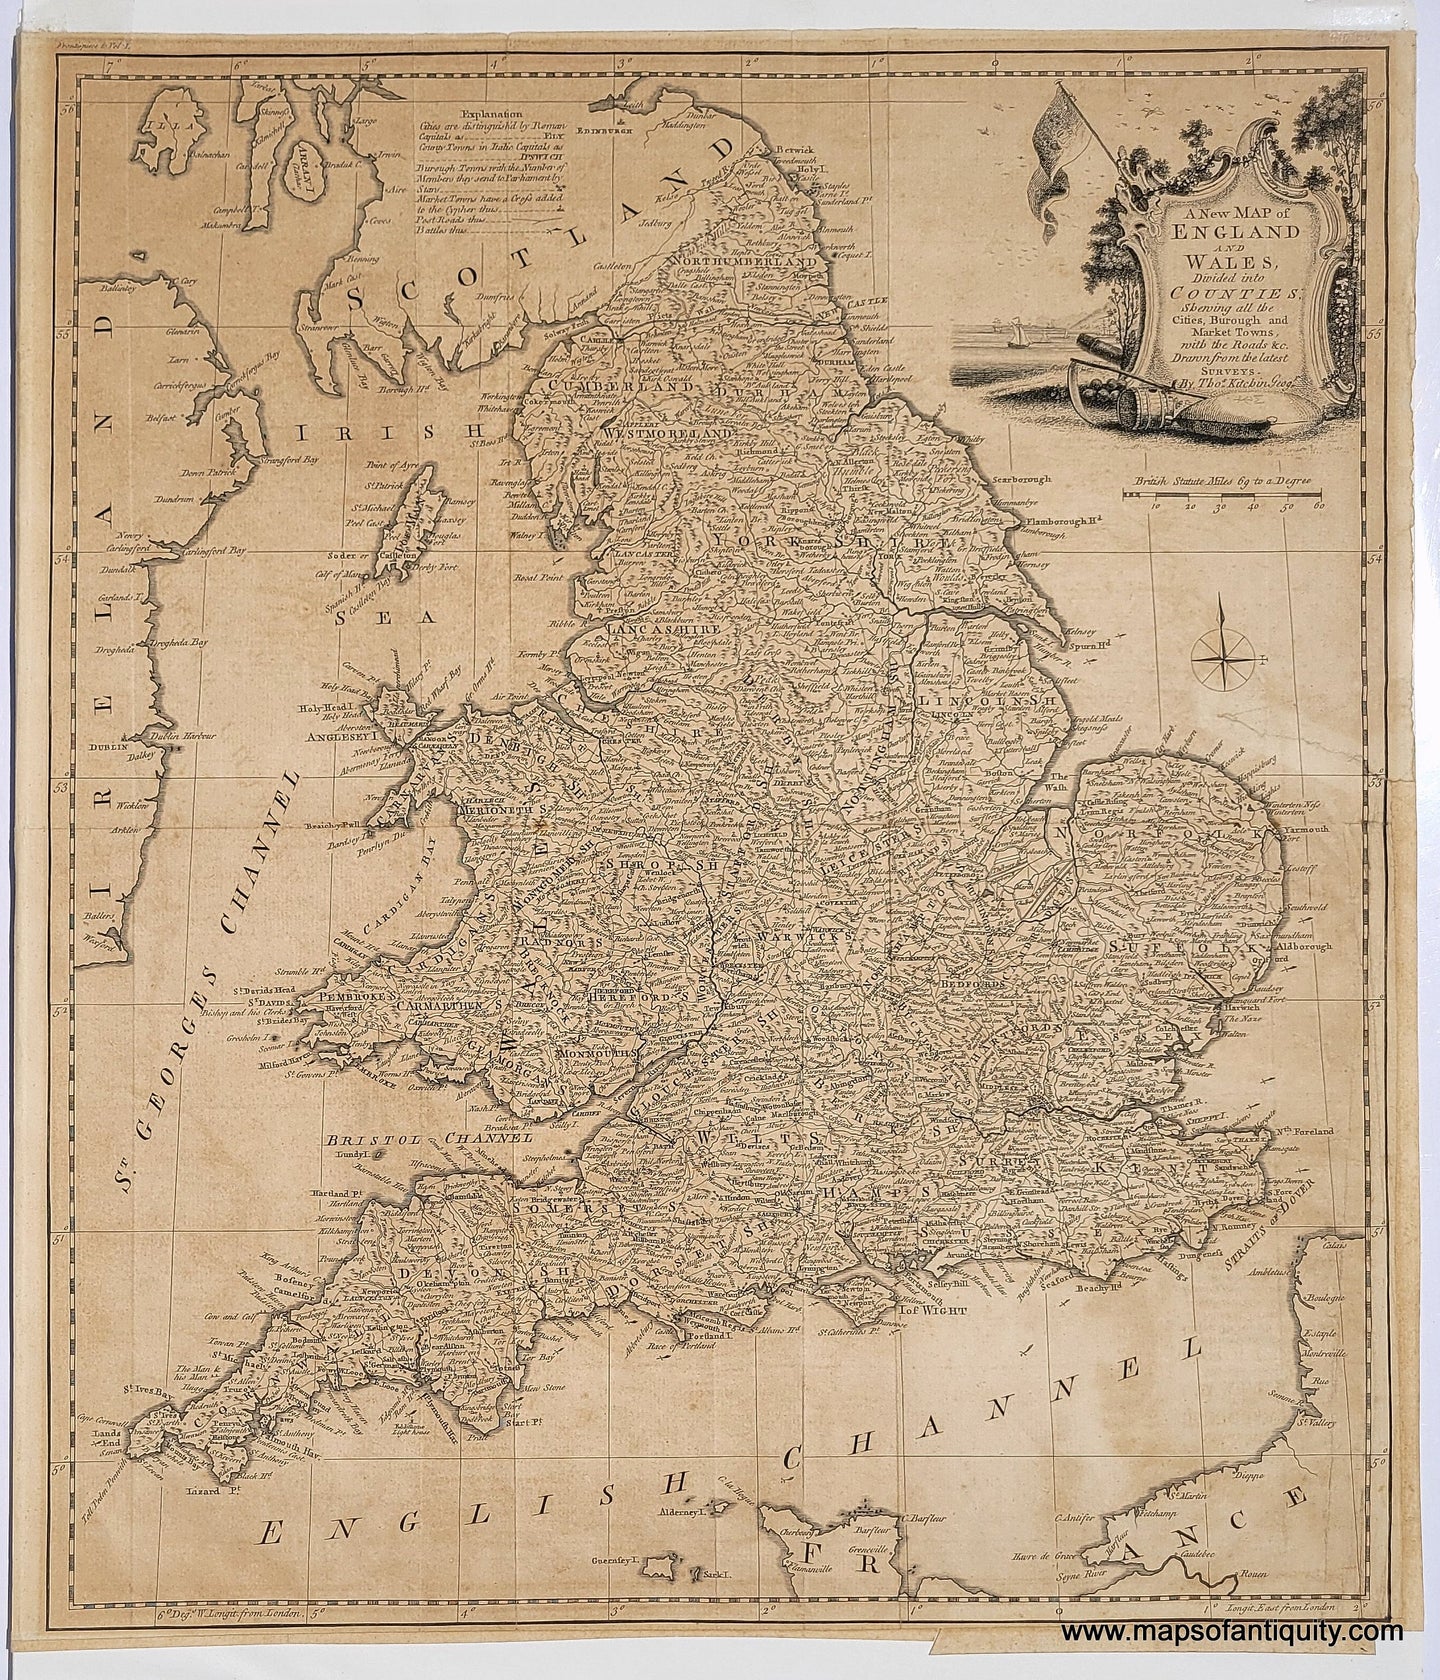 Genuine-Antique-Map-A-New-Map-of-England-and-Wales-Divided-into-Counties-shewing-all-the-Cities-Burough-and-Market-Towns-with-the-Roads--1770-Kitchin-Maps-Of-Antiquity